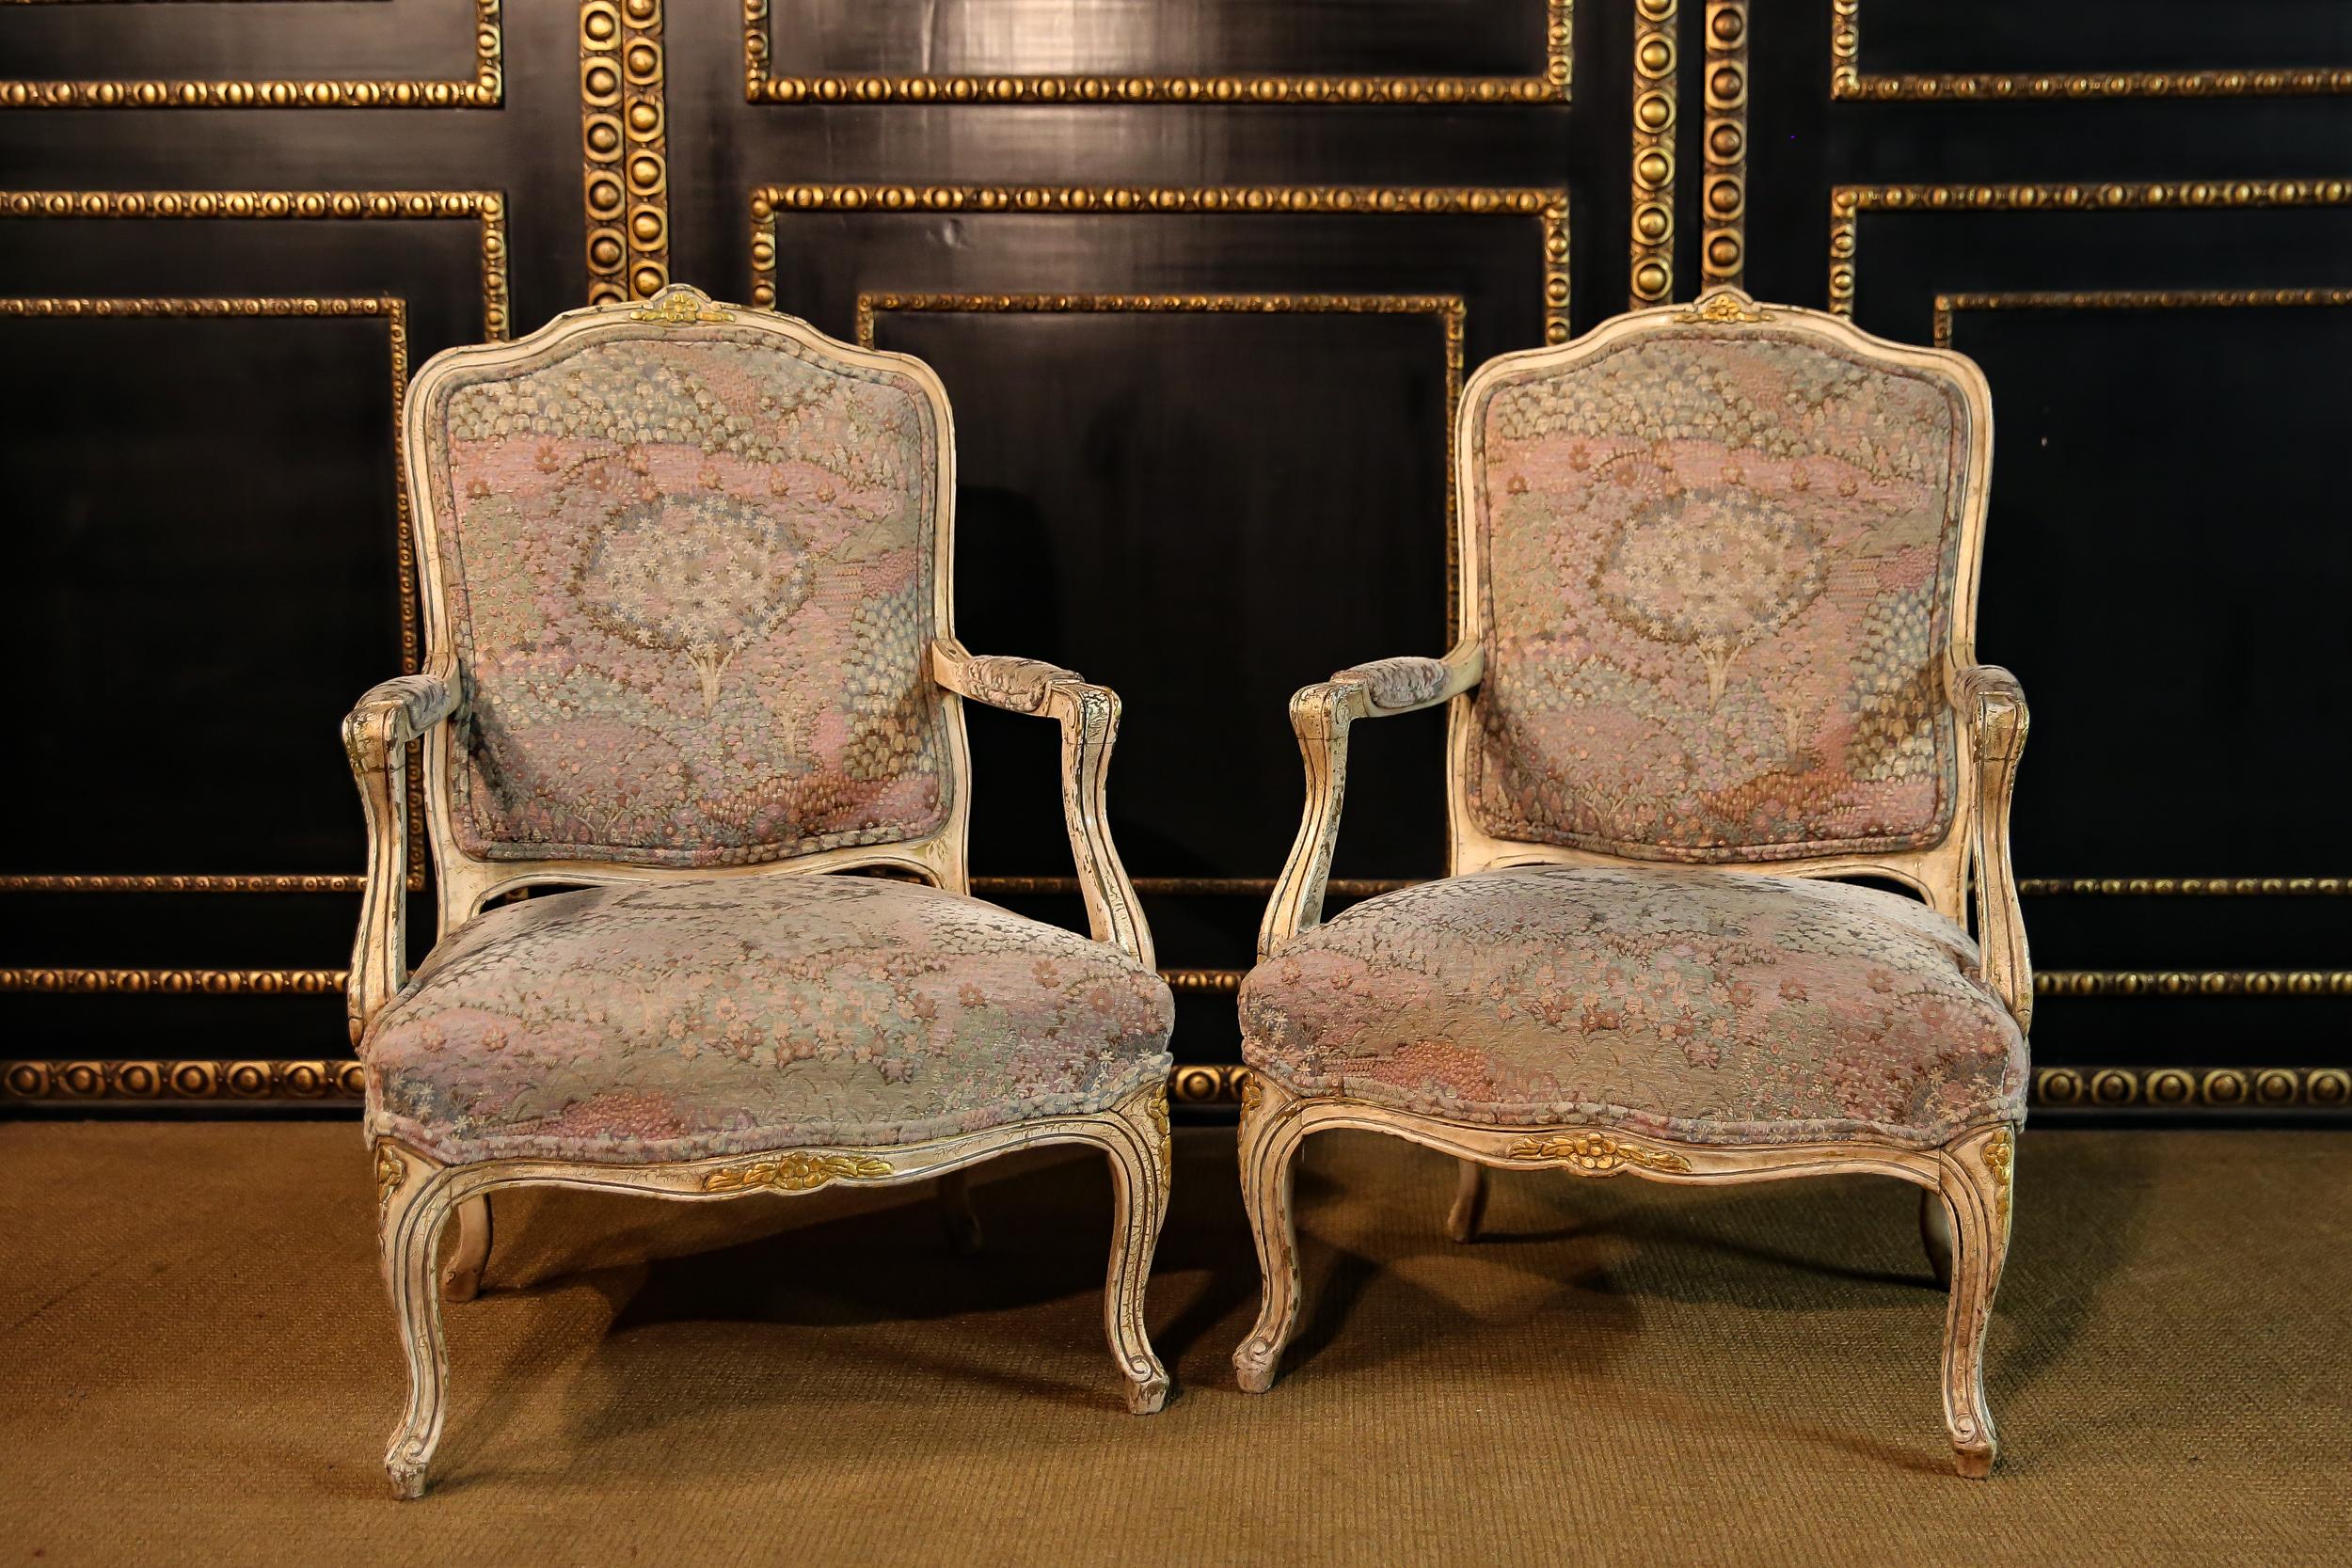 Two armchairs in Baroque style.

2 beautiful armchairs in Baroque style,
Antique white.